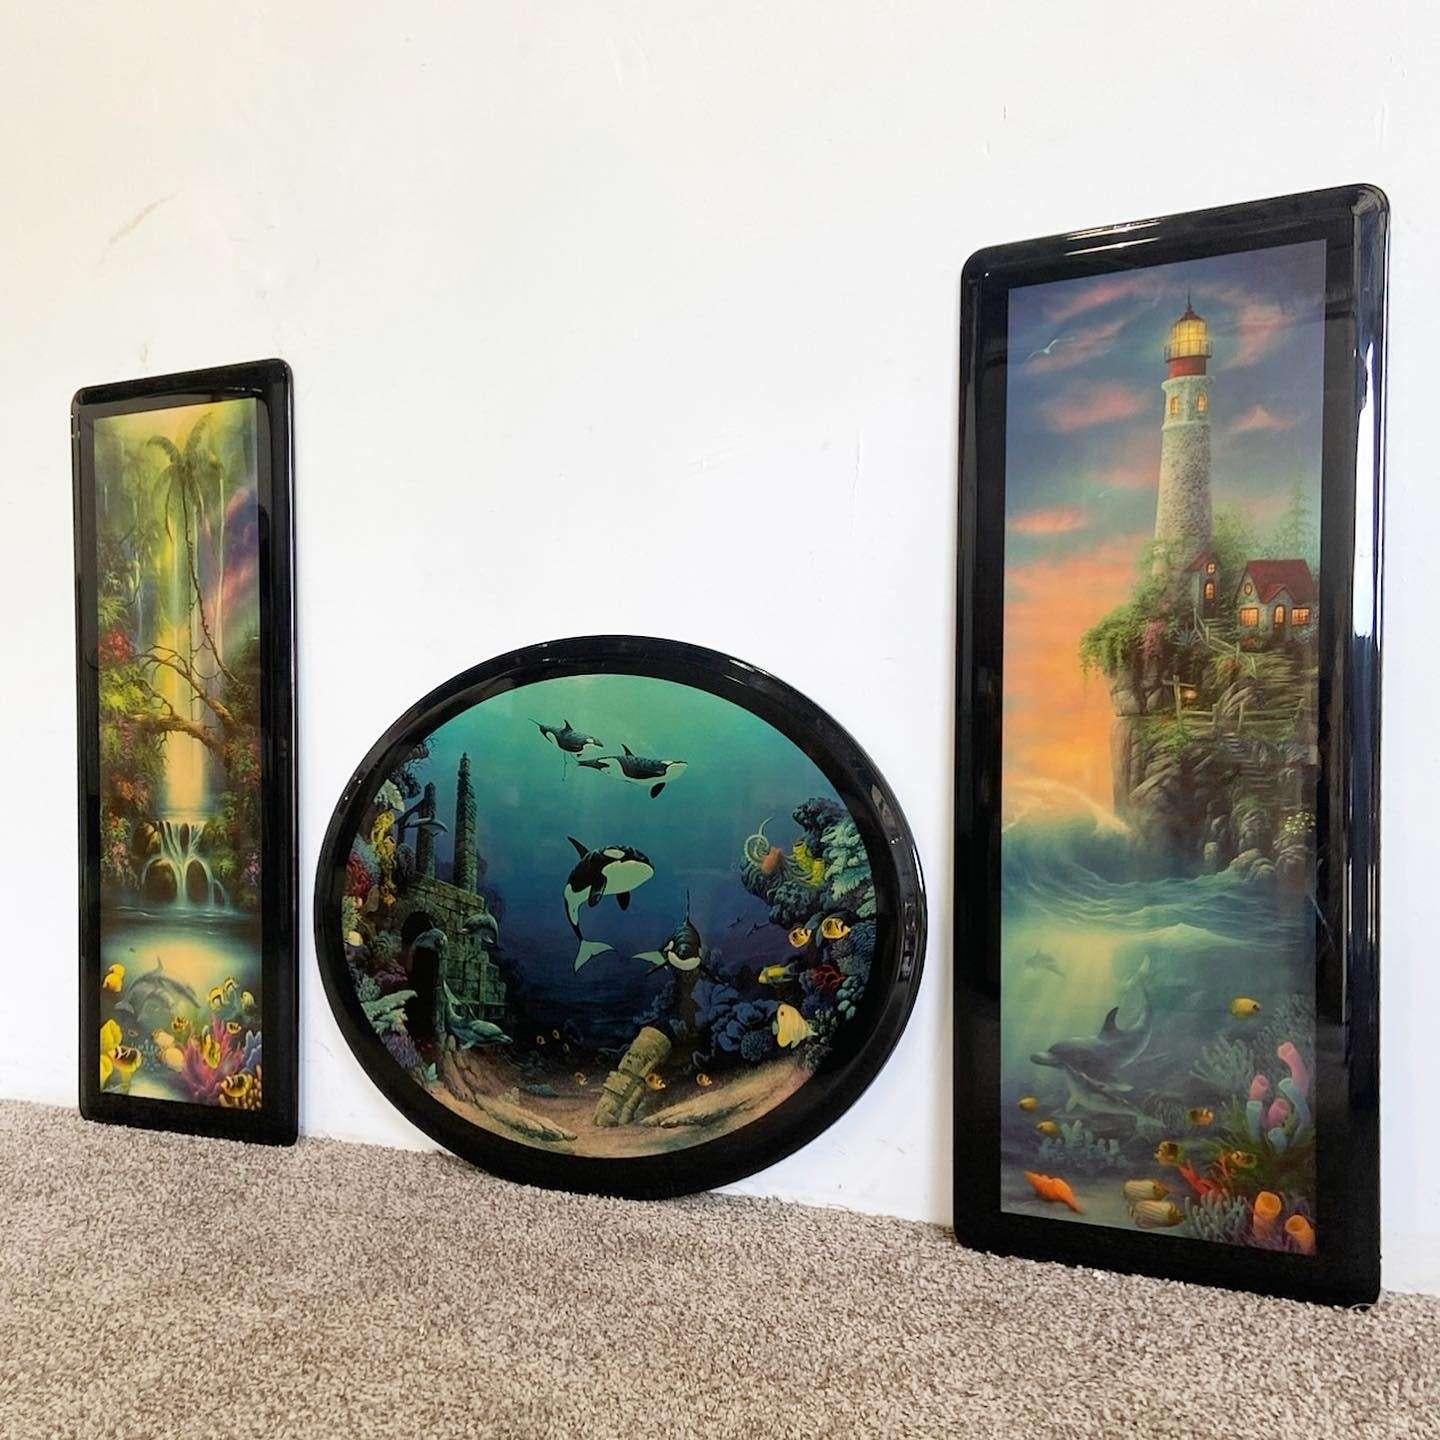 Wonderful vintage epoxied art work. Set included two rectangular pieces and one oval. Strong “Free Willy” vibes.

Oval measures 32”W, 25.25”H